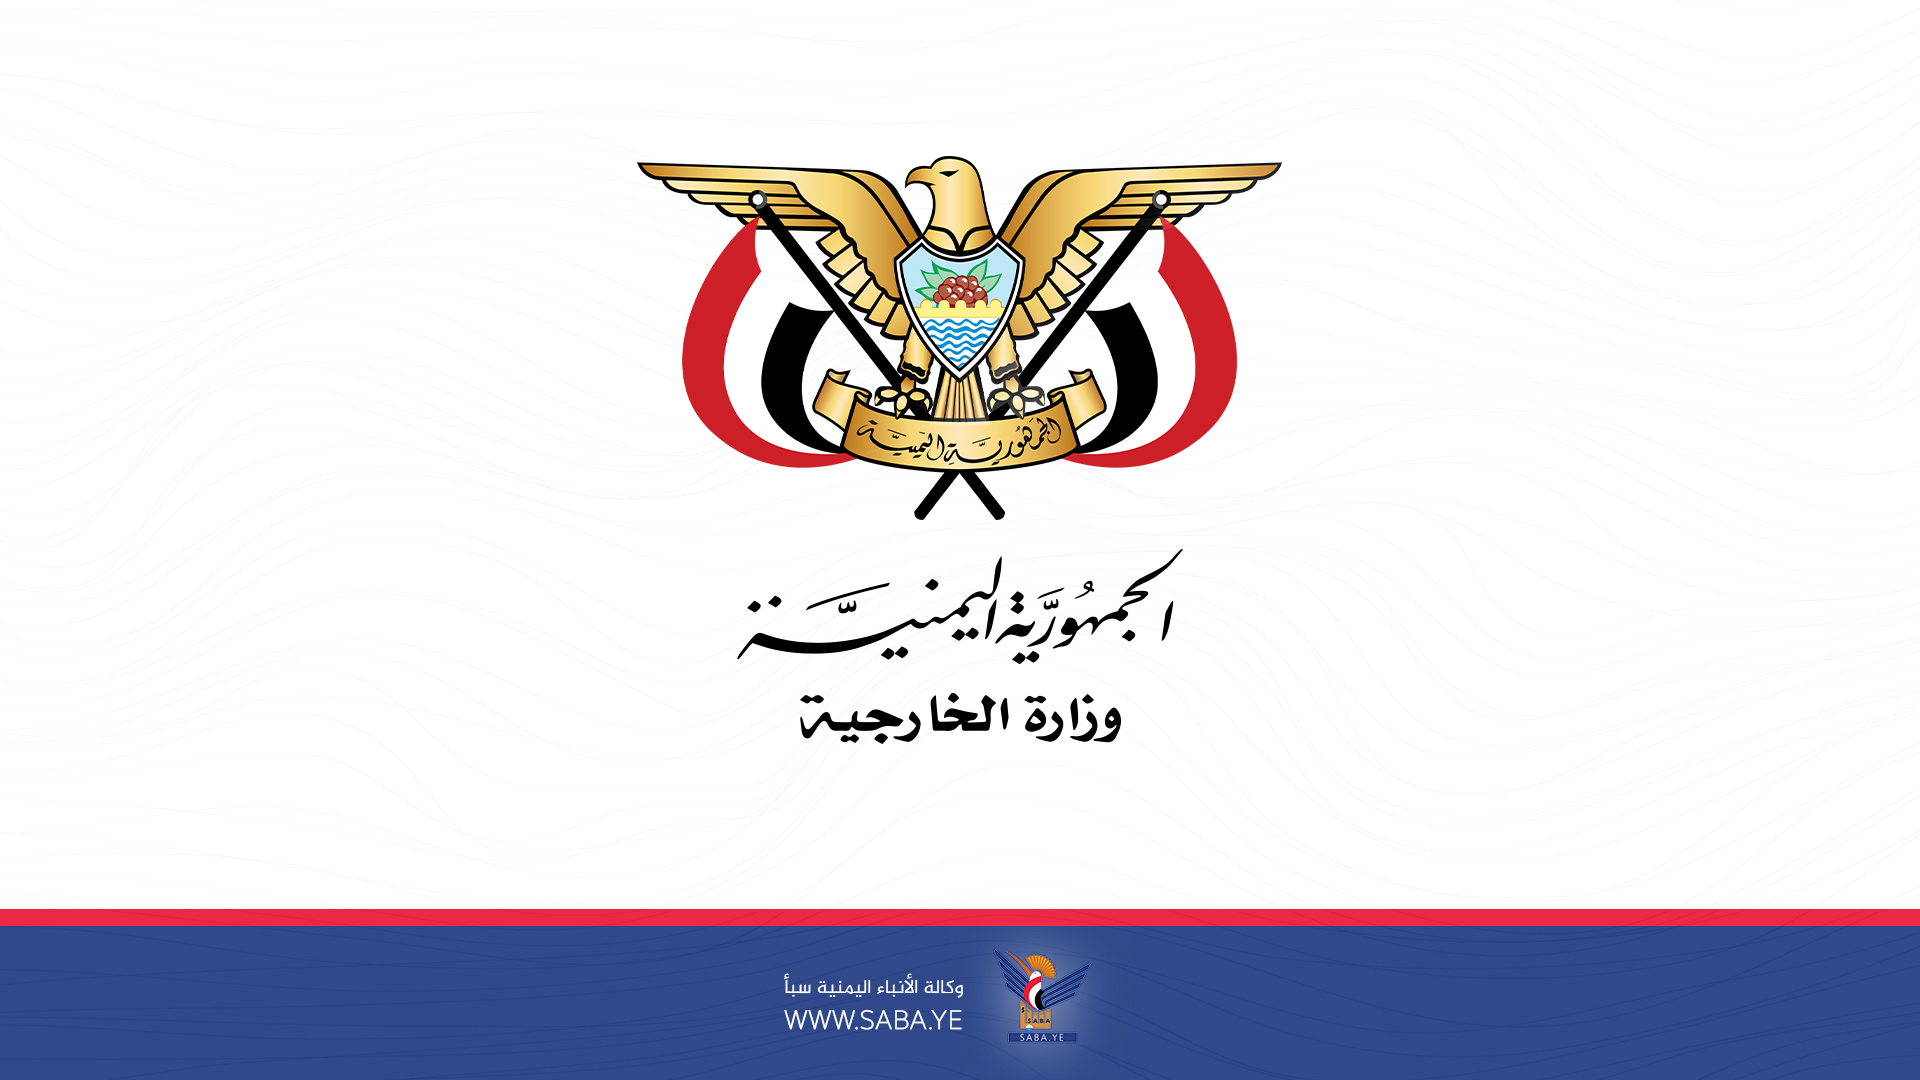 Ministry of Foreign Affairs: Quadripartite aggression is an attempt to impose guardianship on Yemen